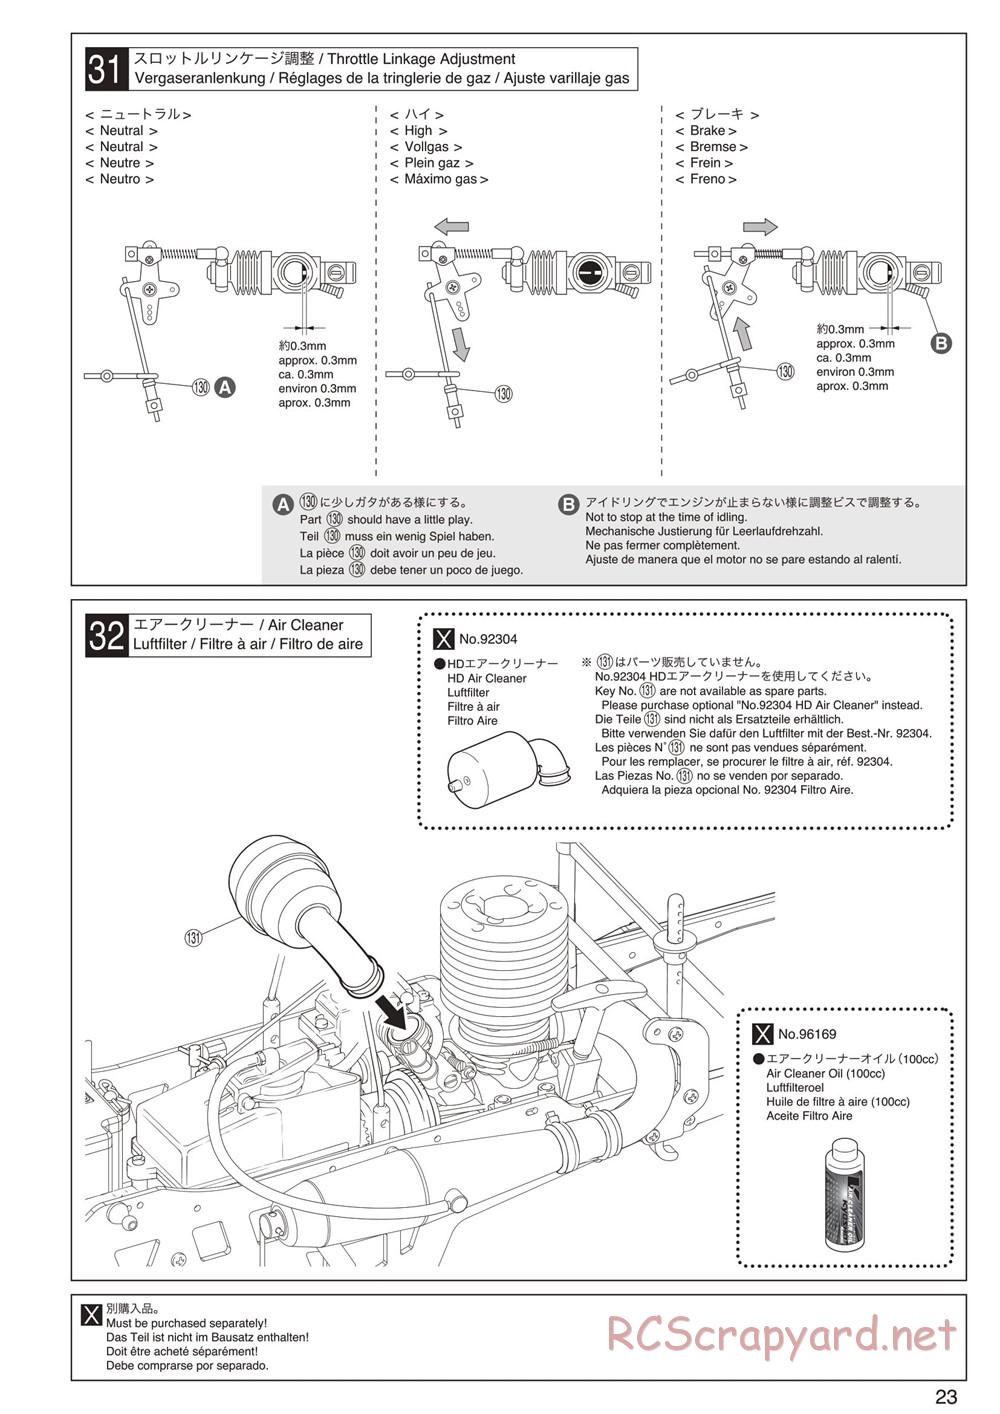 Kyosho - Mad Crusher - Manual - Page 23